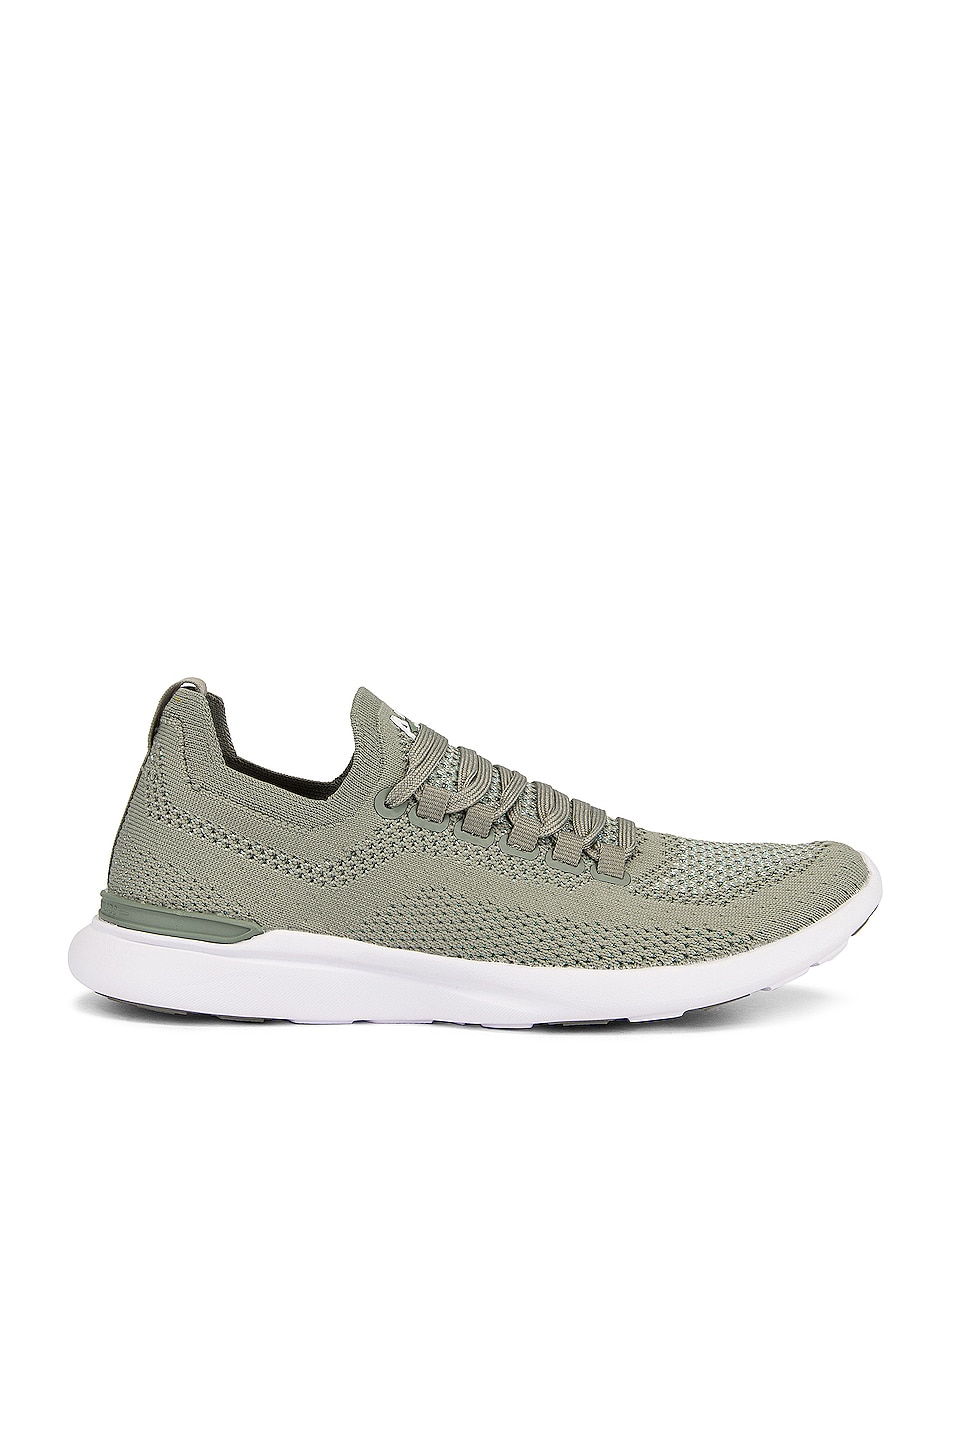 Image 1 of APL: Athletic Propulsion Labs TechLoom Breeze Sneaker in Shadow Green, Metallic Pear, & White